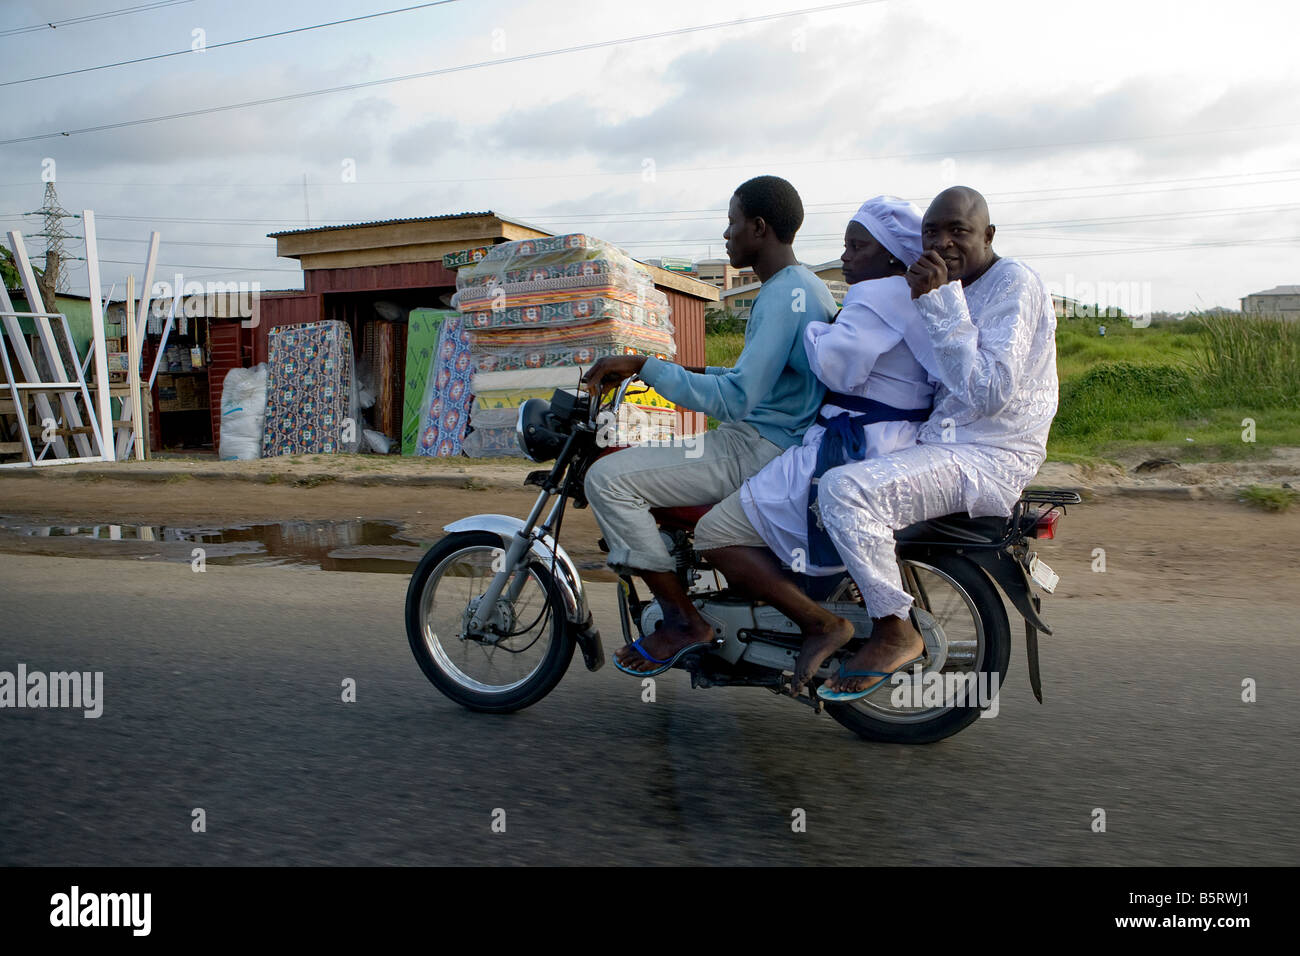 Three men share a motorbike along the road leading out of Lagos, Nigeria, on a warm sunny evening Stock Photo